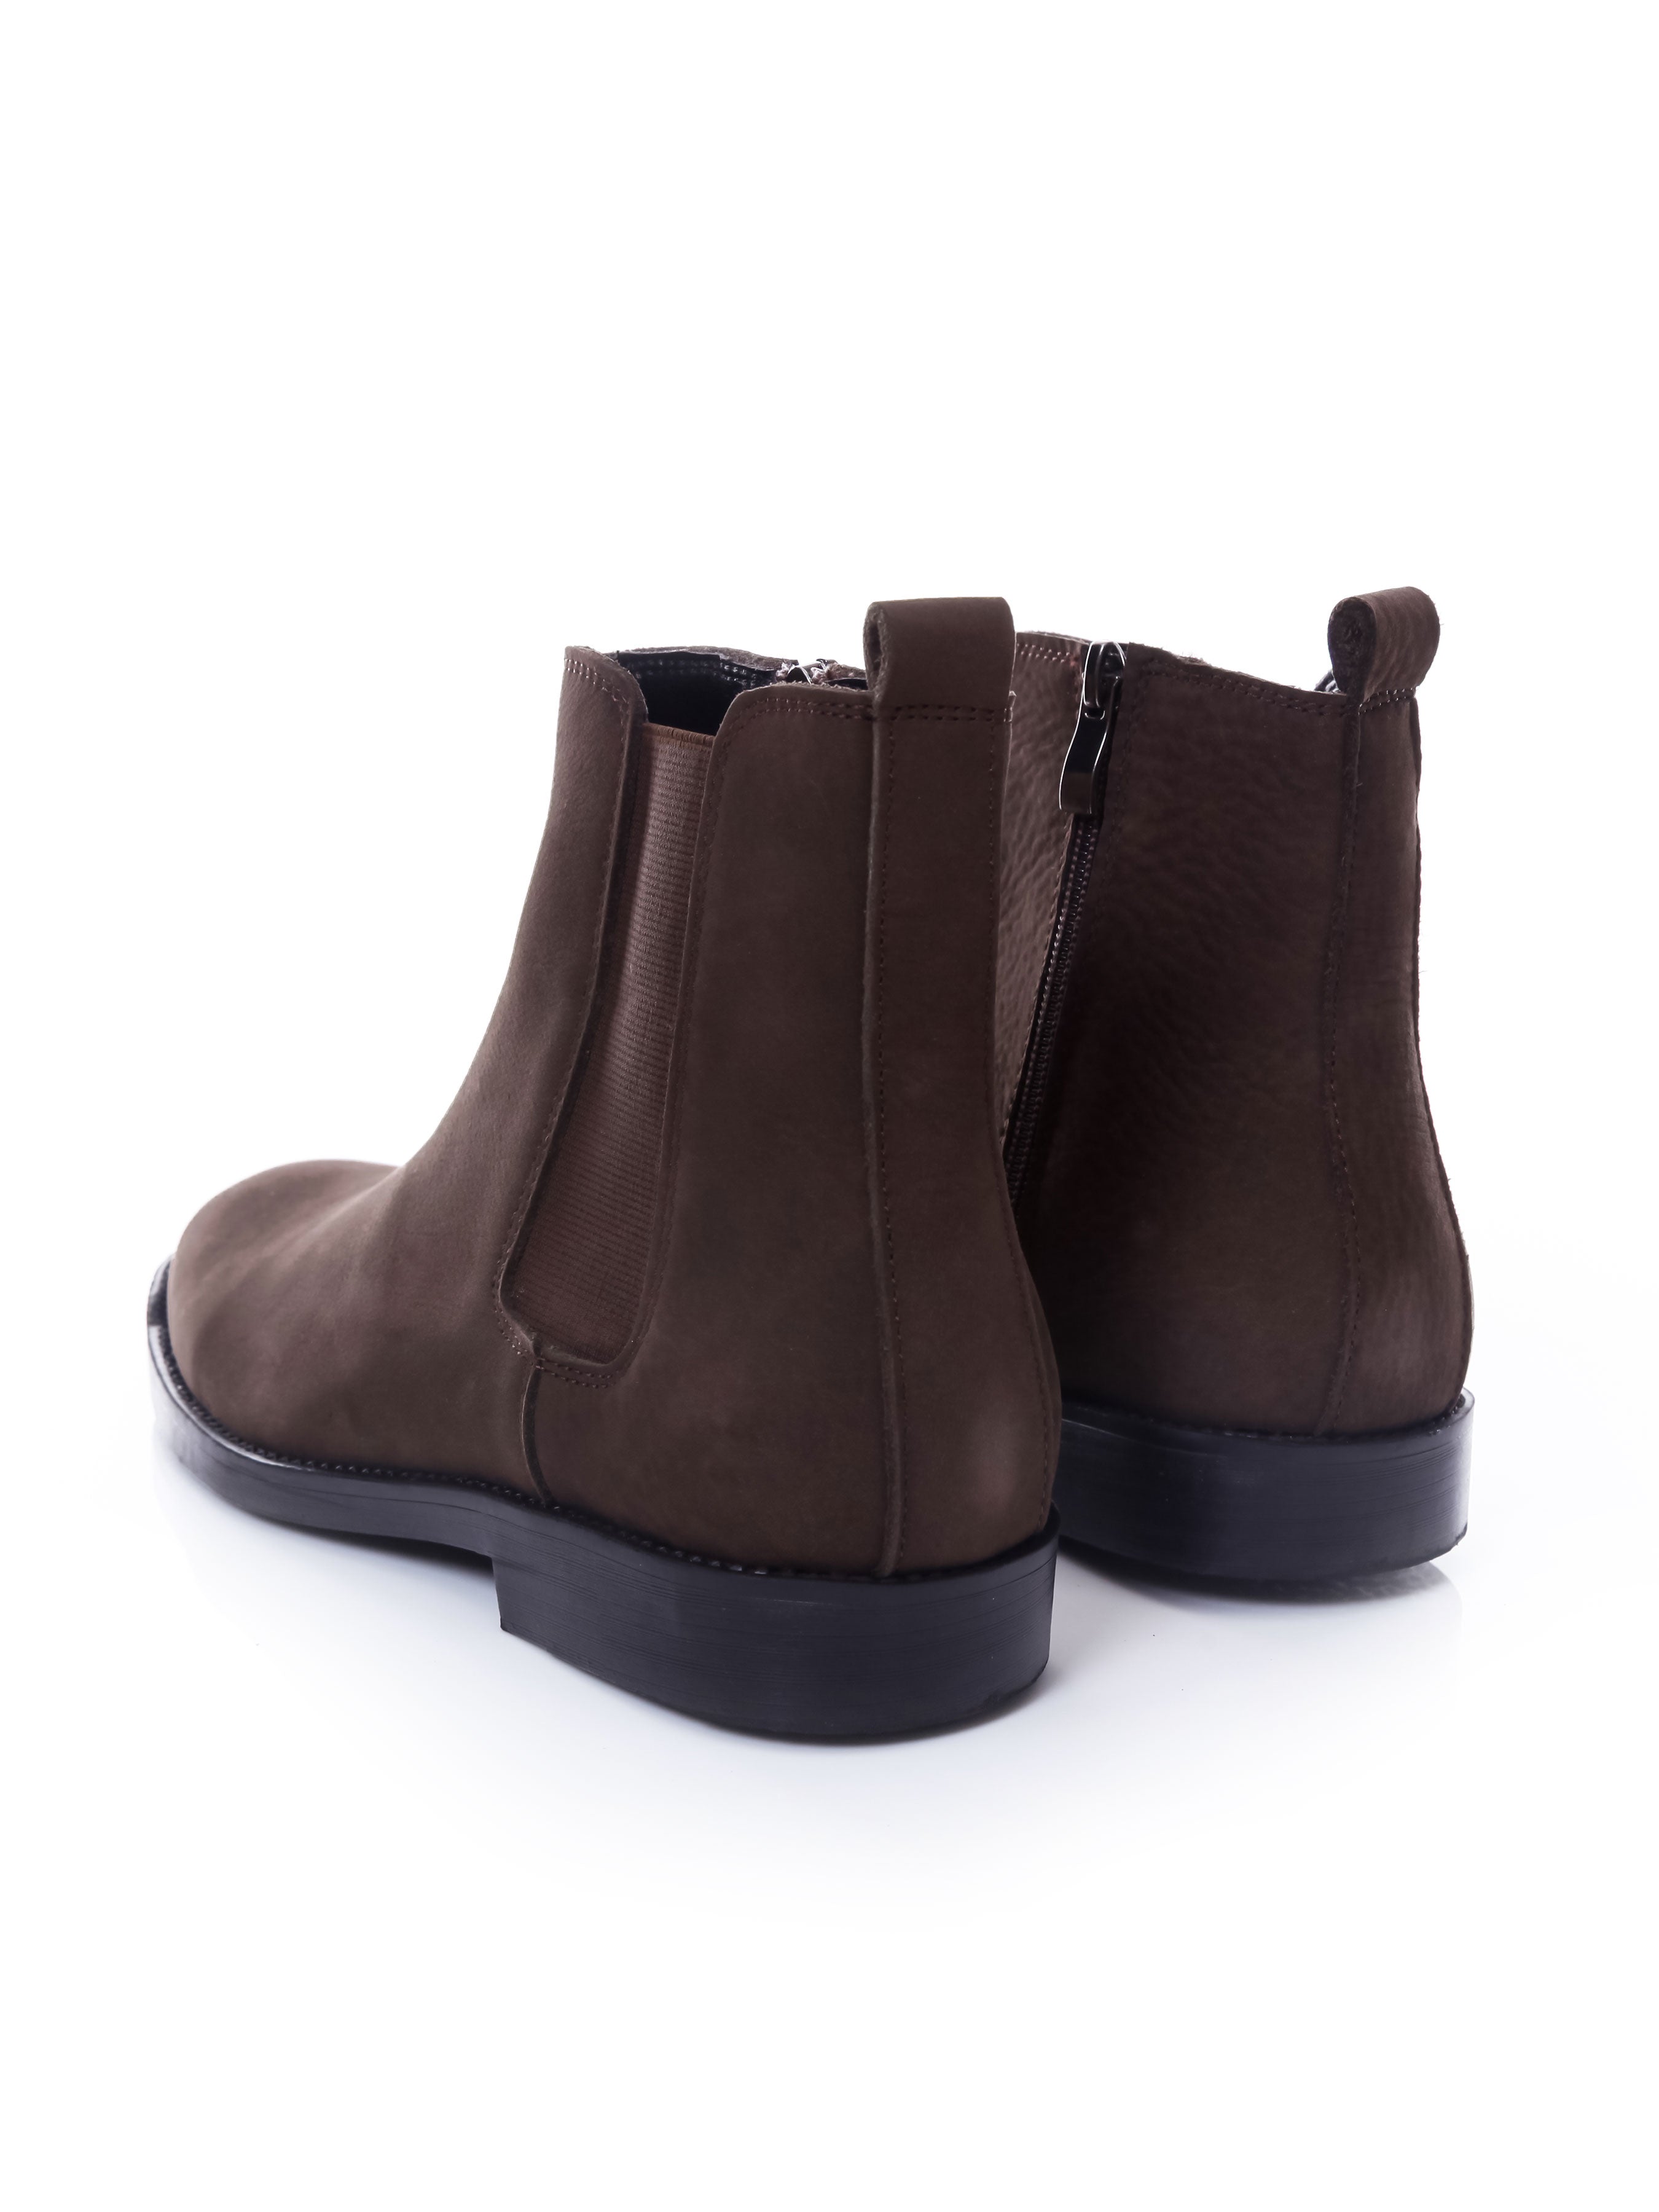 Chelsea Boots With Zipper - Coffee Nubuck Leather (Crepe Sole) - Zeve Shoes